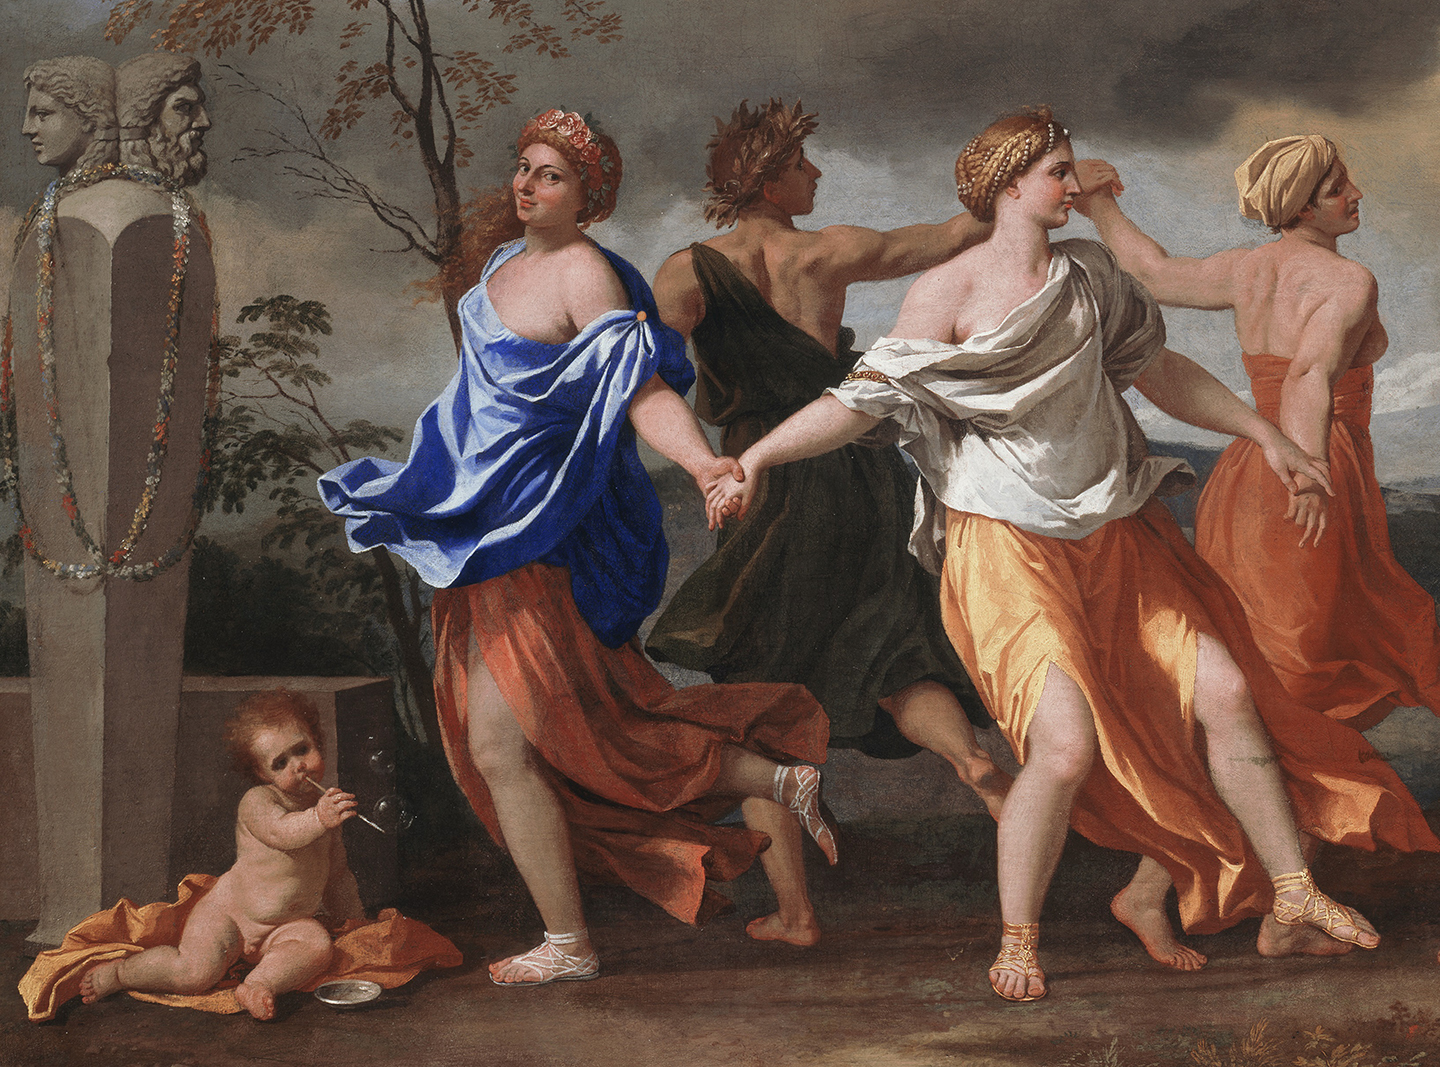 Detail from Nicolas Poussin, “A Dance to the Music of Time,”